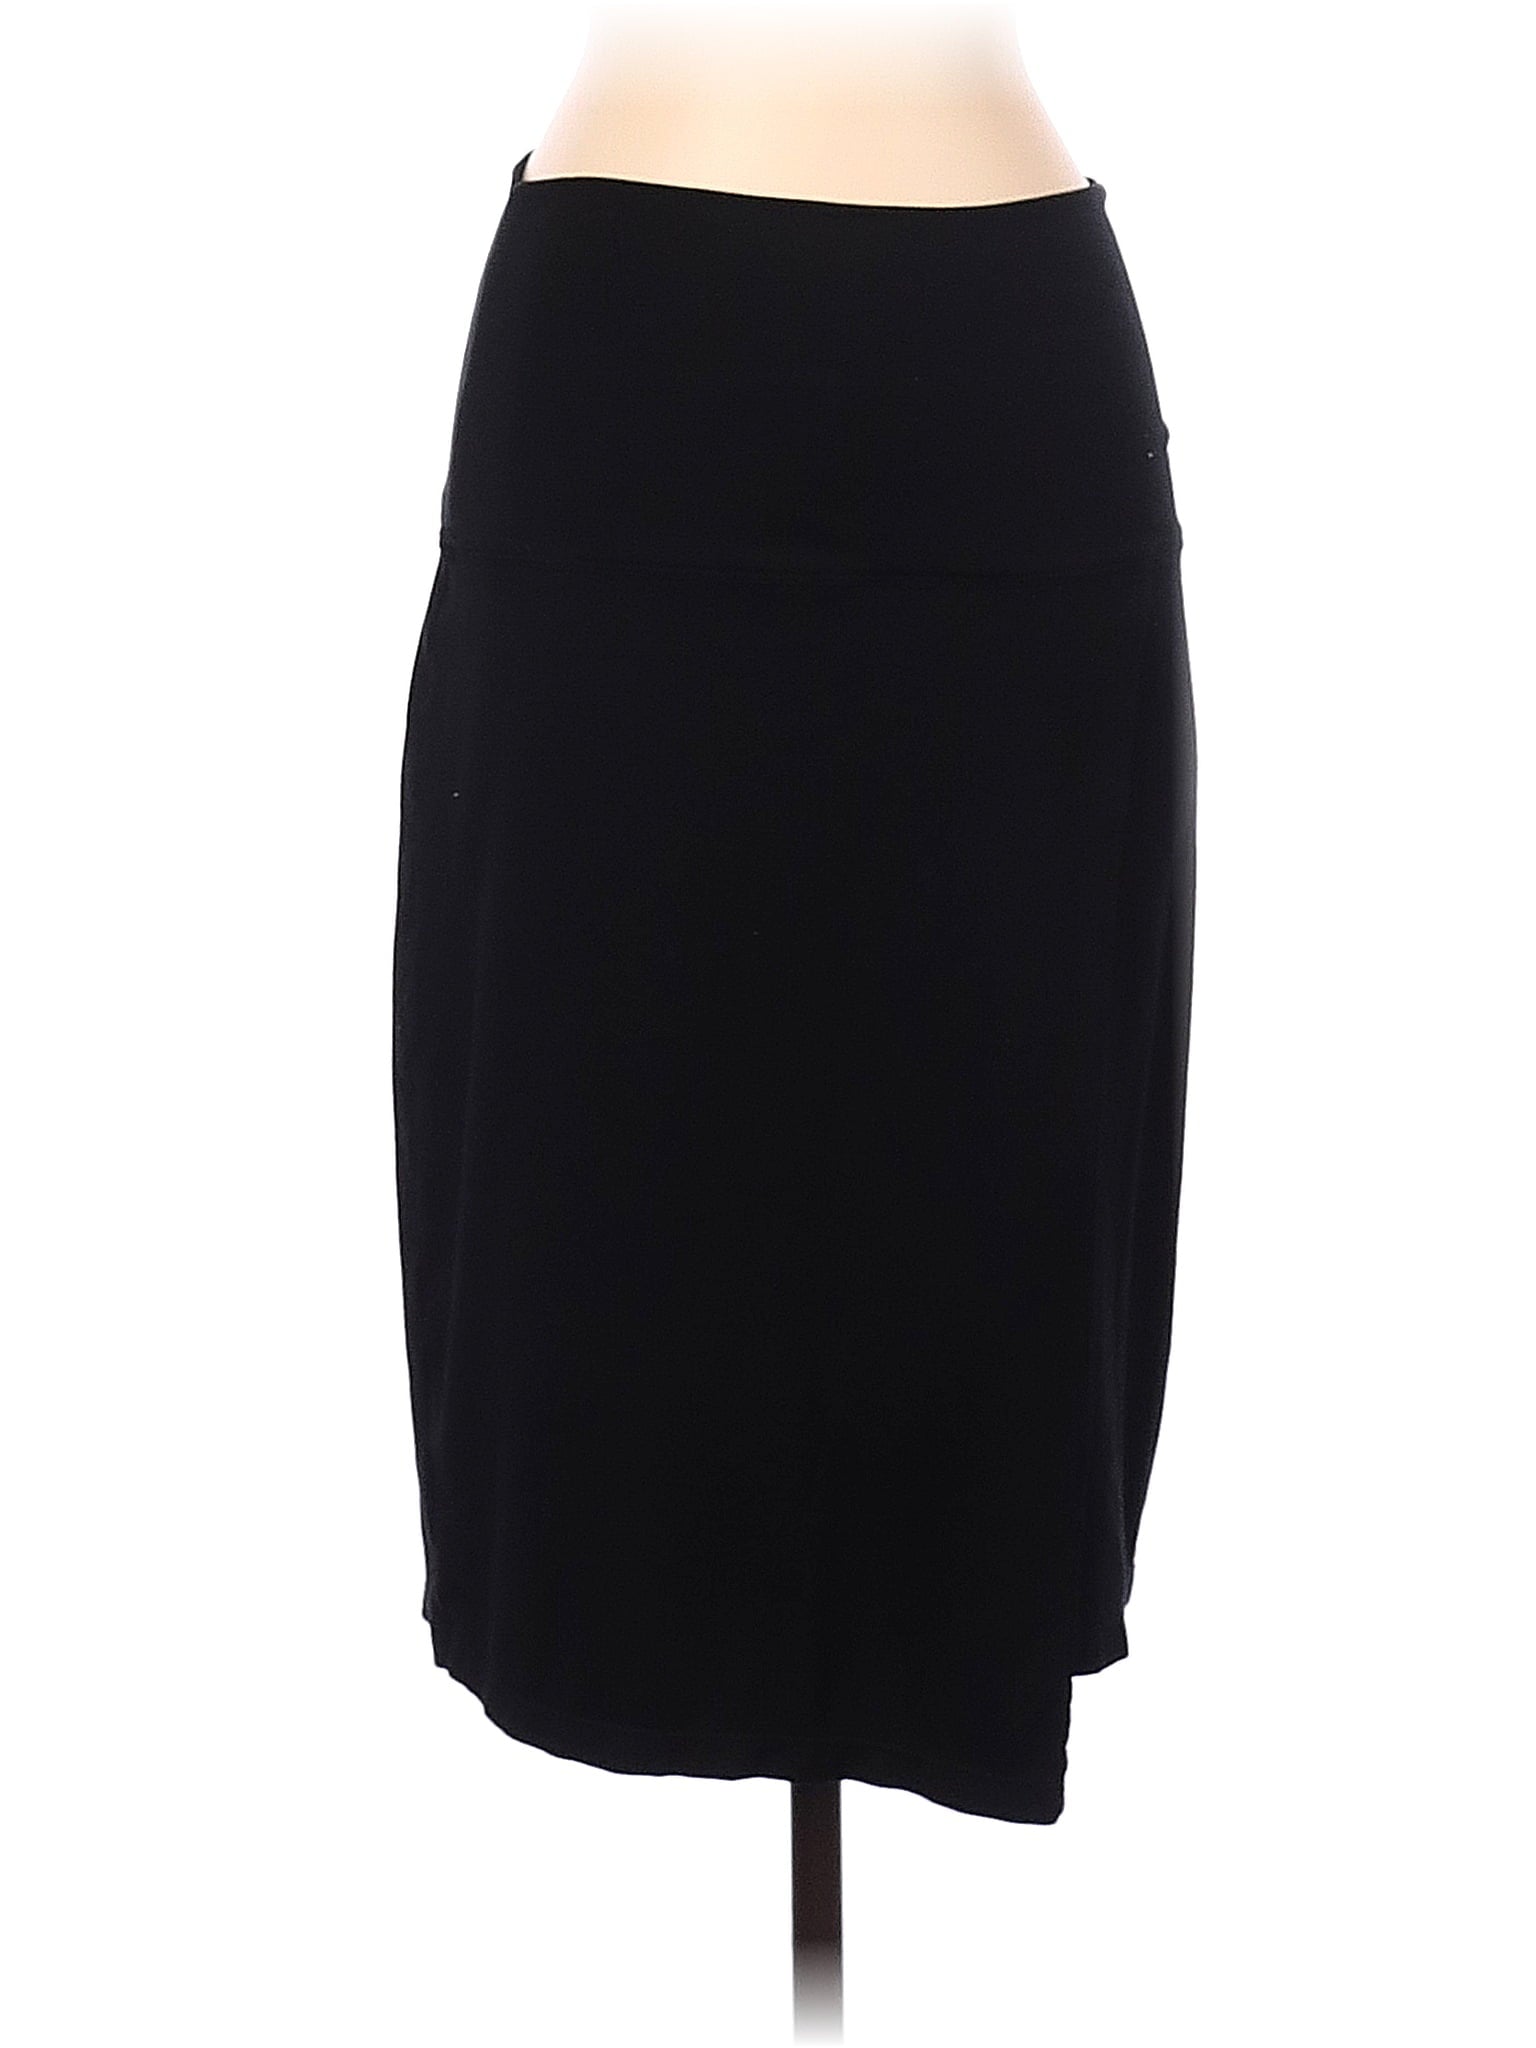 Casual Skirt size - S